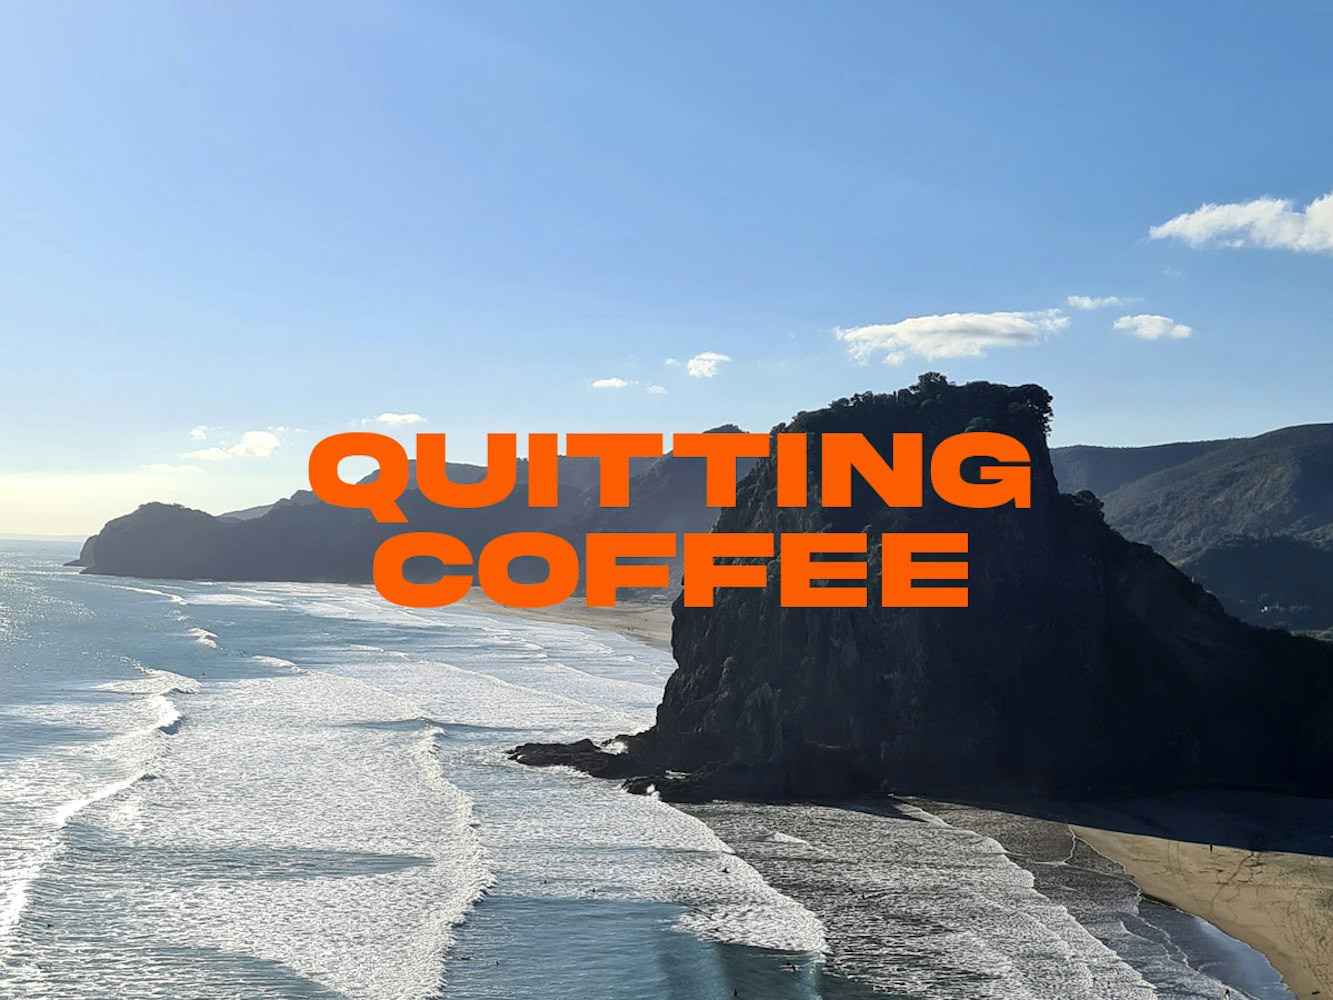 Cover Image for Quitting coffee (with mushrooms)